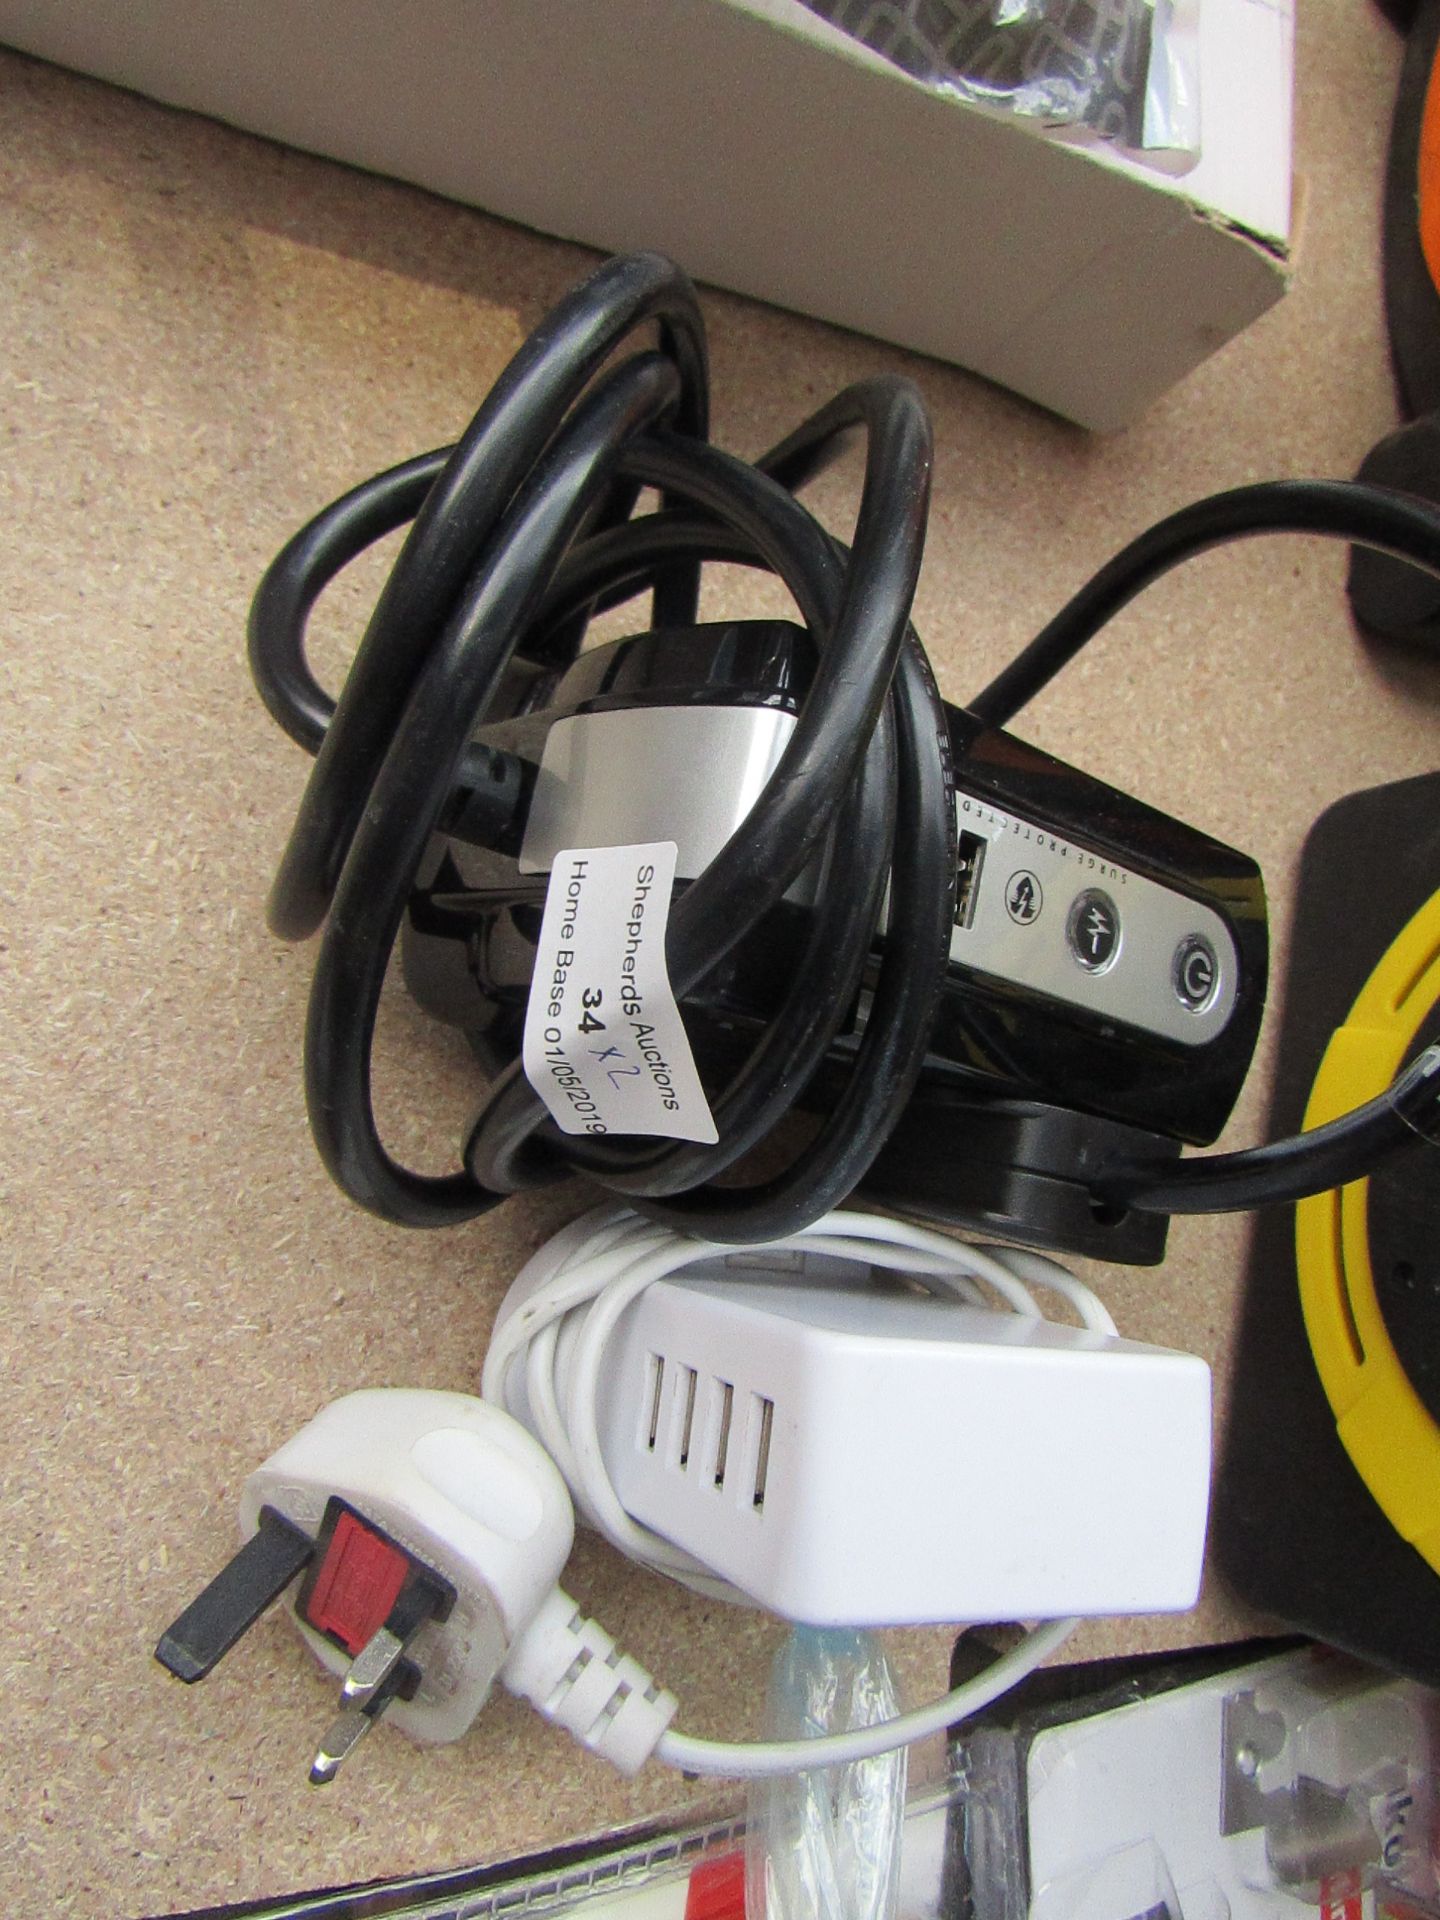 2x items being a Surge protector ex tension lead with USB ports and a 4 Usb extension lead, both